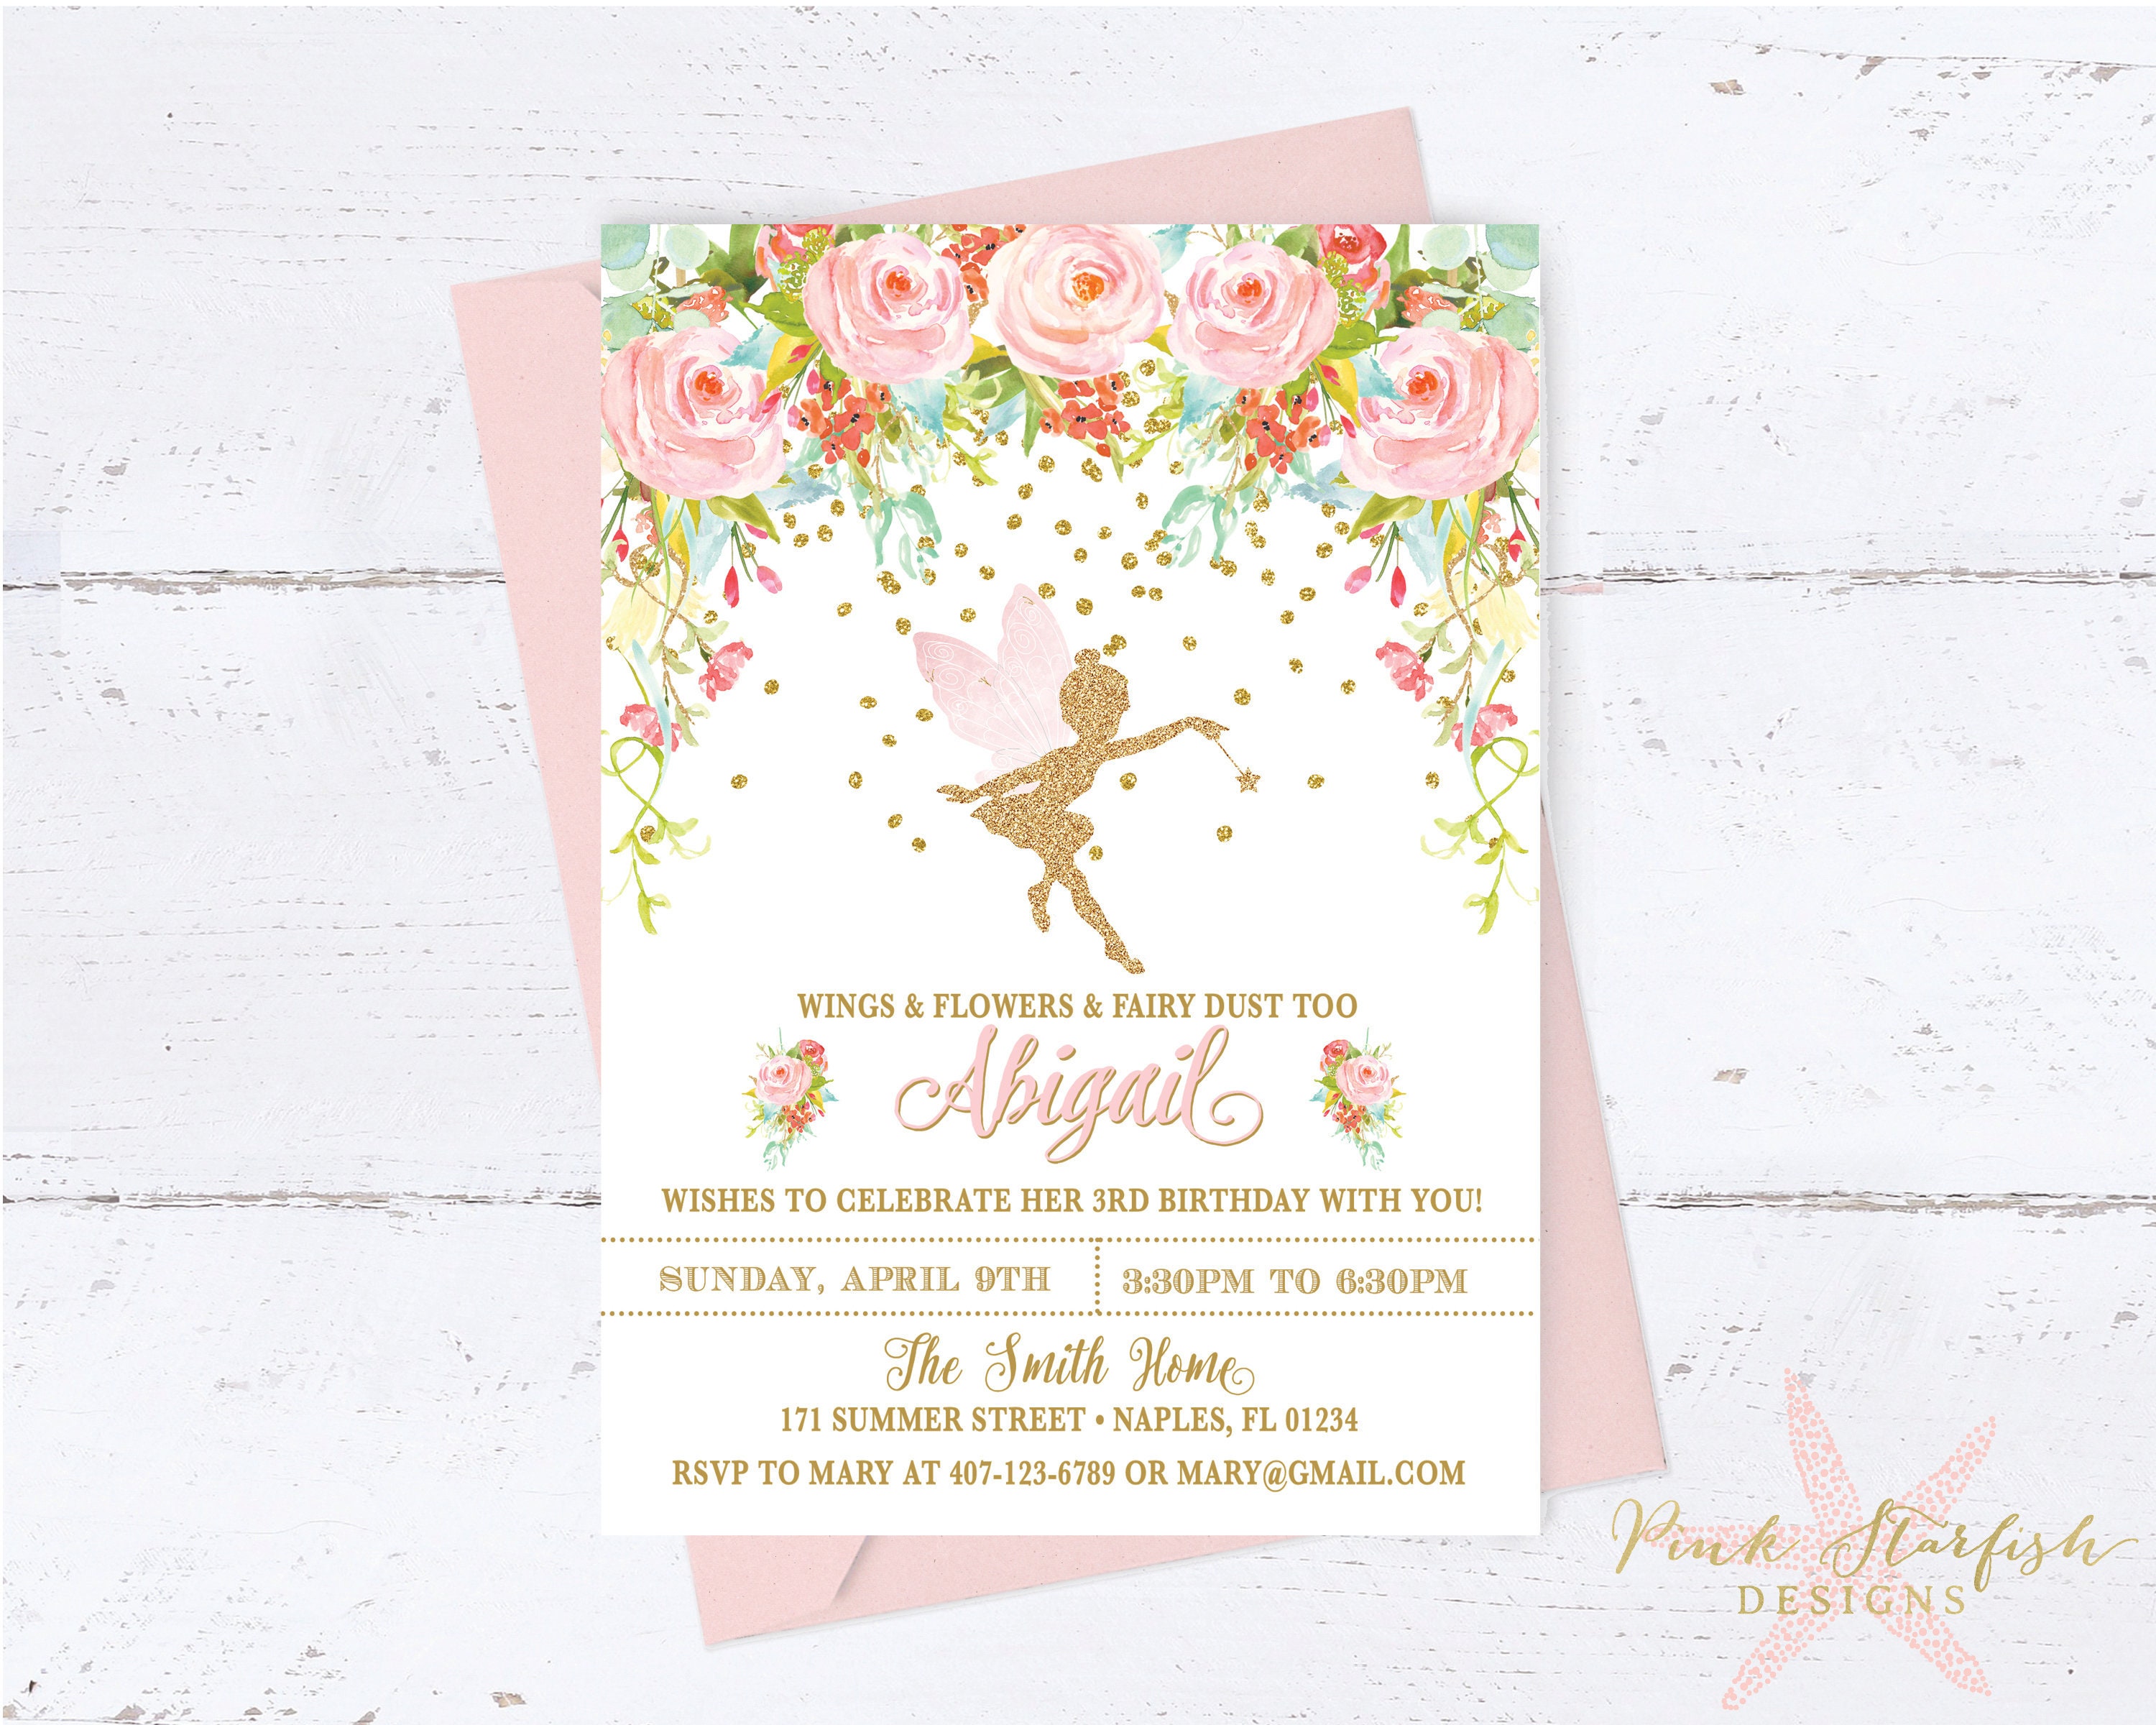 FAIRY INVITATIONS FAIRIES ROSE GOLD GLITTER GIRLS BIRTHDAY PARTY SUPPLIES FLORAL